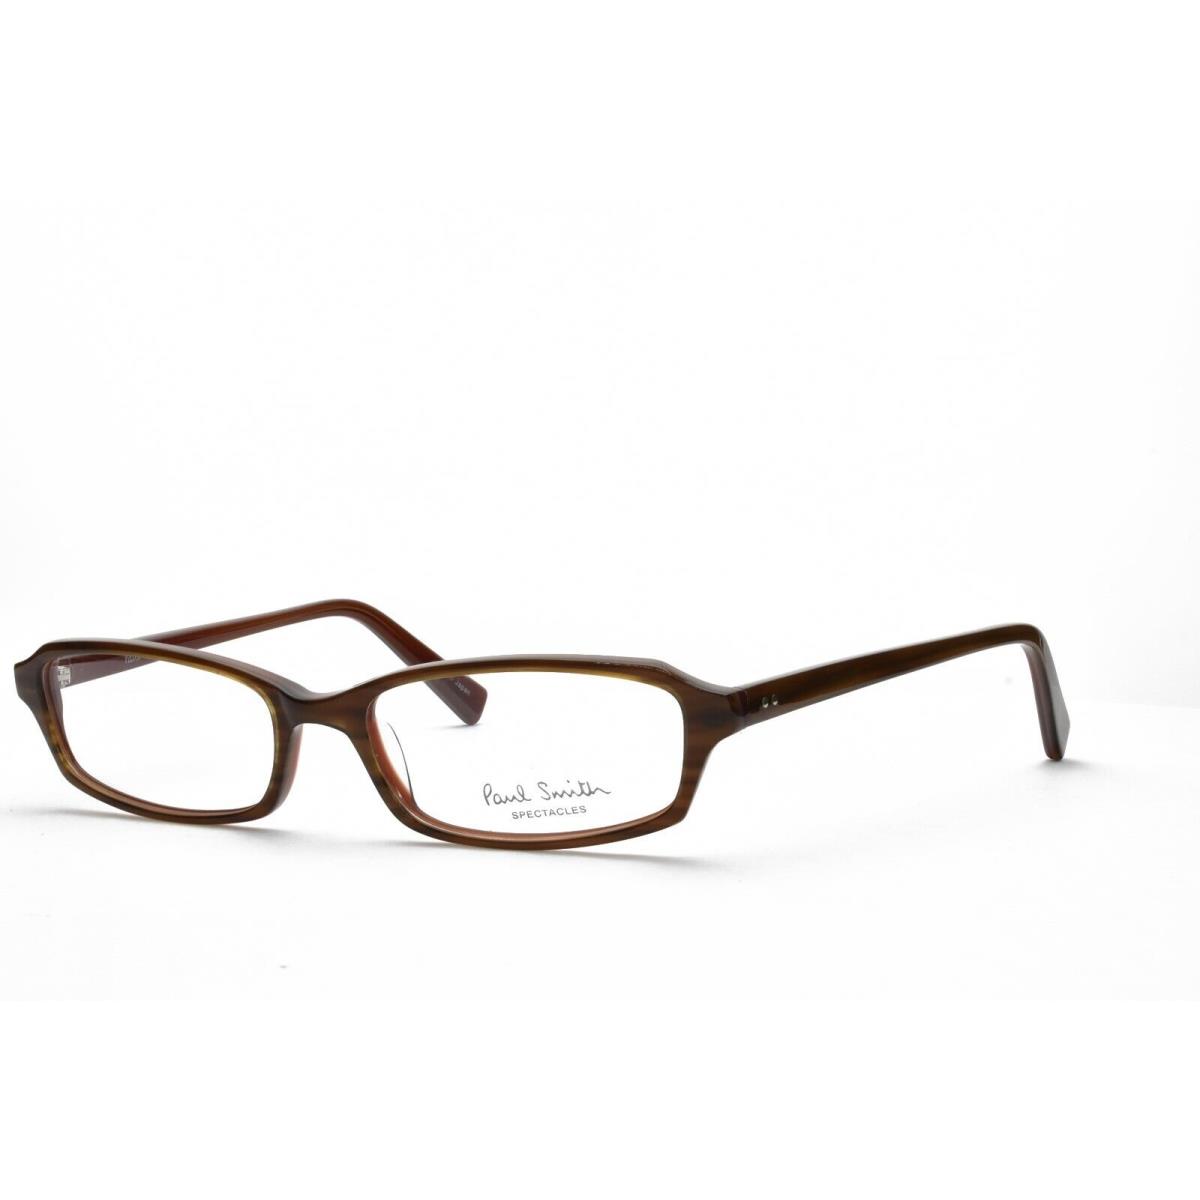 Paul Smith PS 276 TC Eyeglasses Frames Only 52-16-140